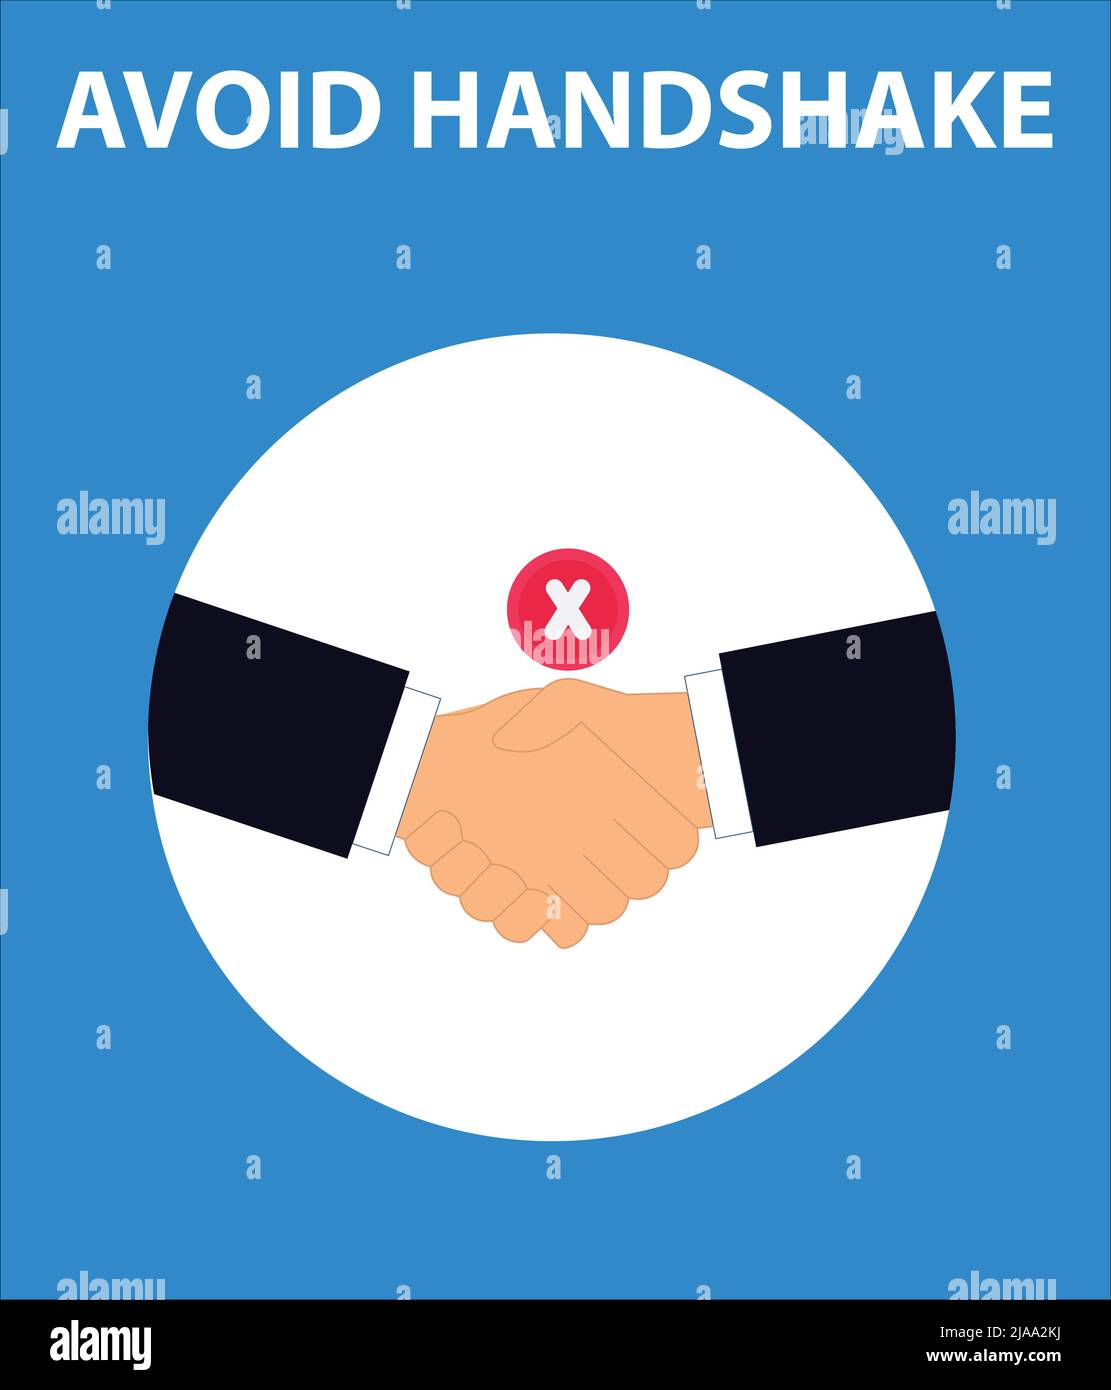 Safety precaution poster for covid 19. Avoid handshake with your friend and office staff. Stock Vector